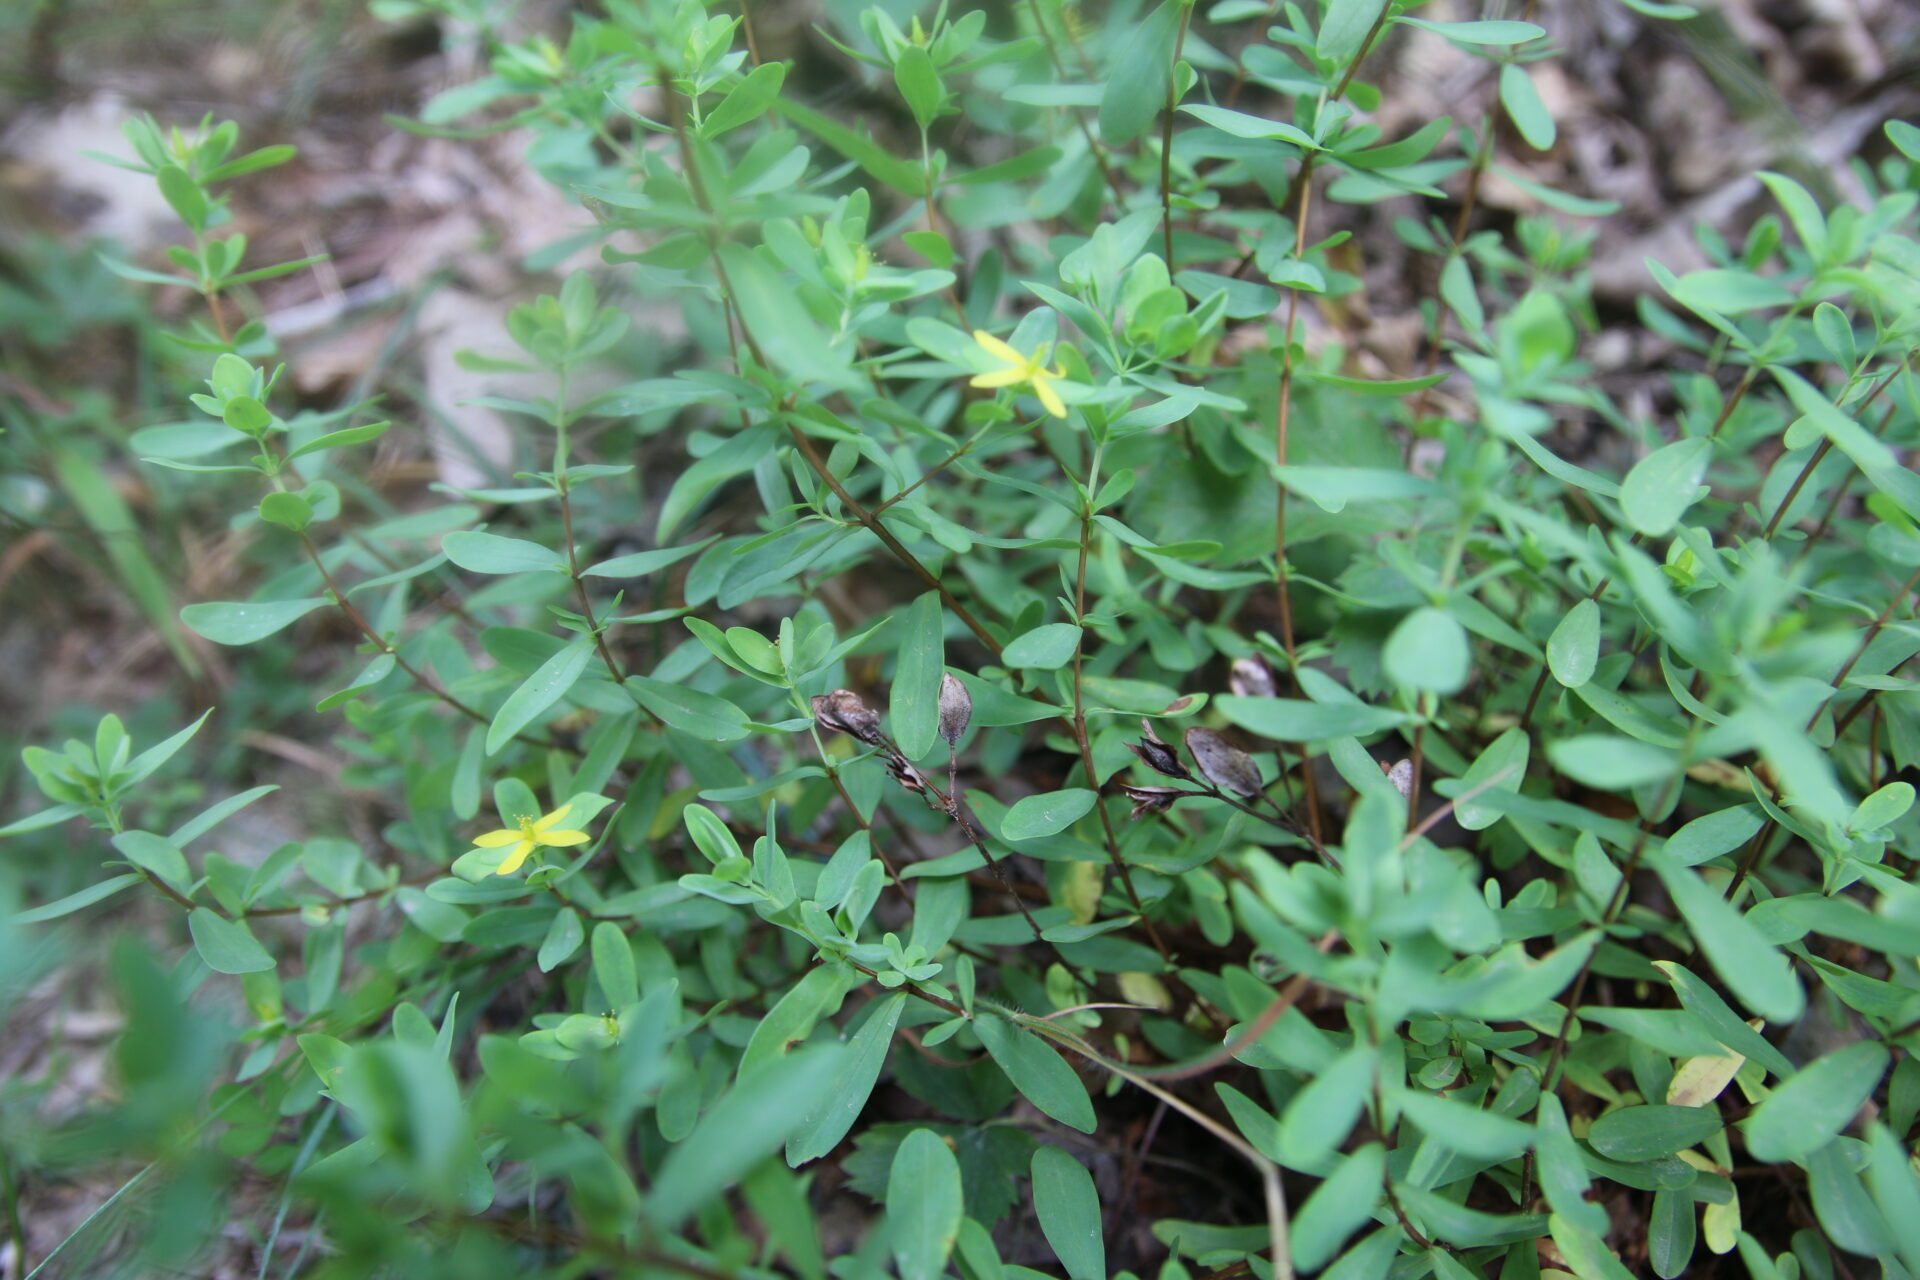 Small yellow flowers bloom on a hillside of green leaves.